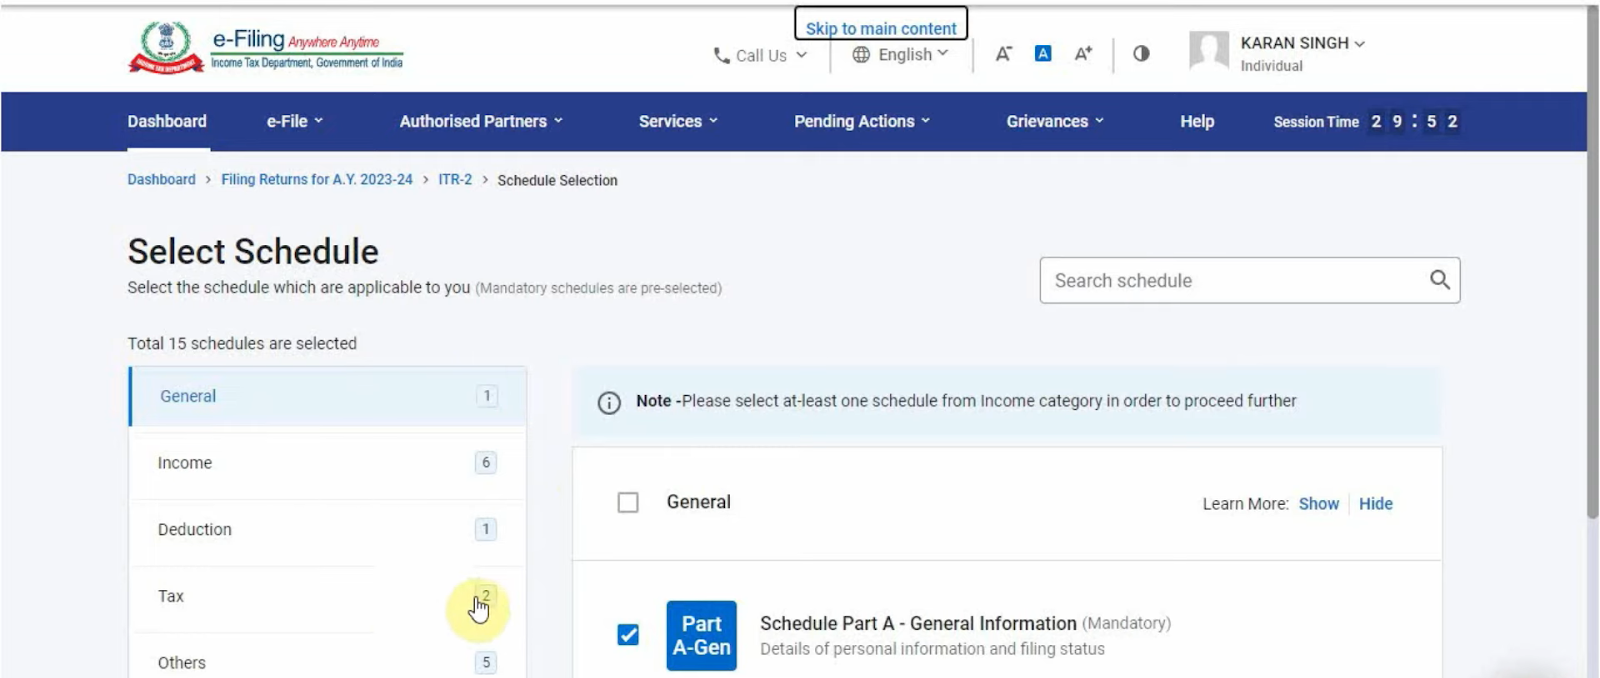 To proceed with filing your general information, select Schedule Part A. Similarly select all the relevant schedules in the remaining categories, i.e., income, deduction, tax, and others.